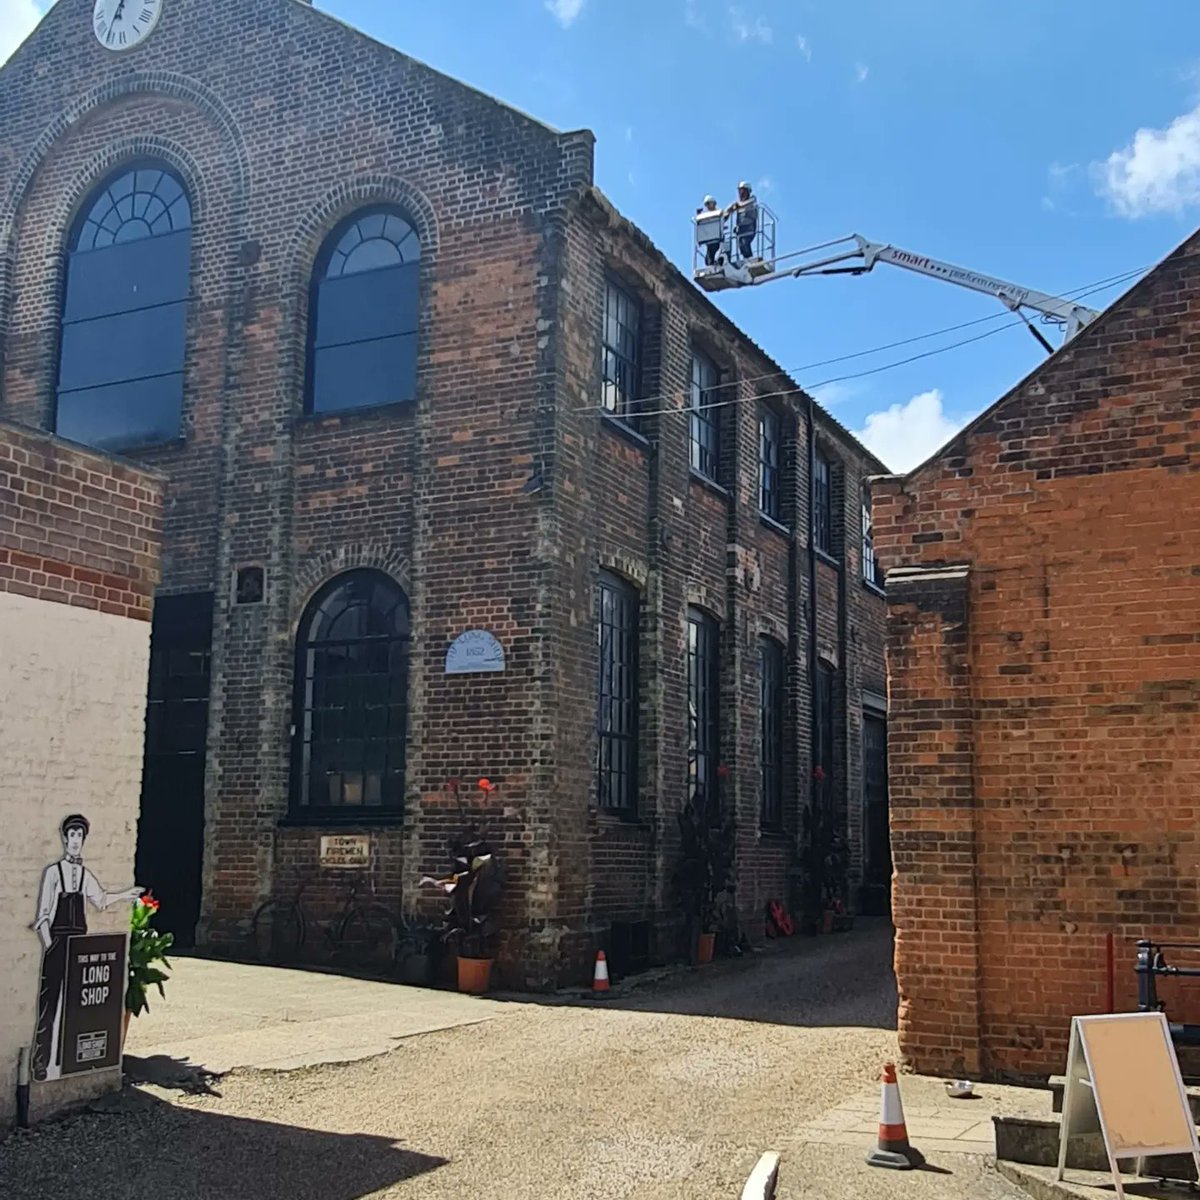 RHP architects getting up close to check the roof repair works needed.
#longshopmuseum #artscouncilengland